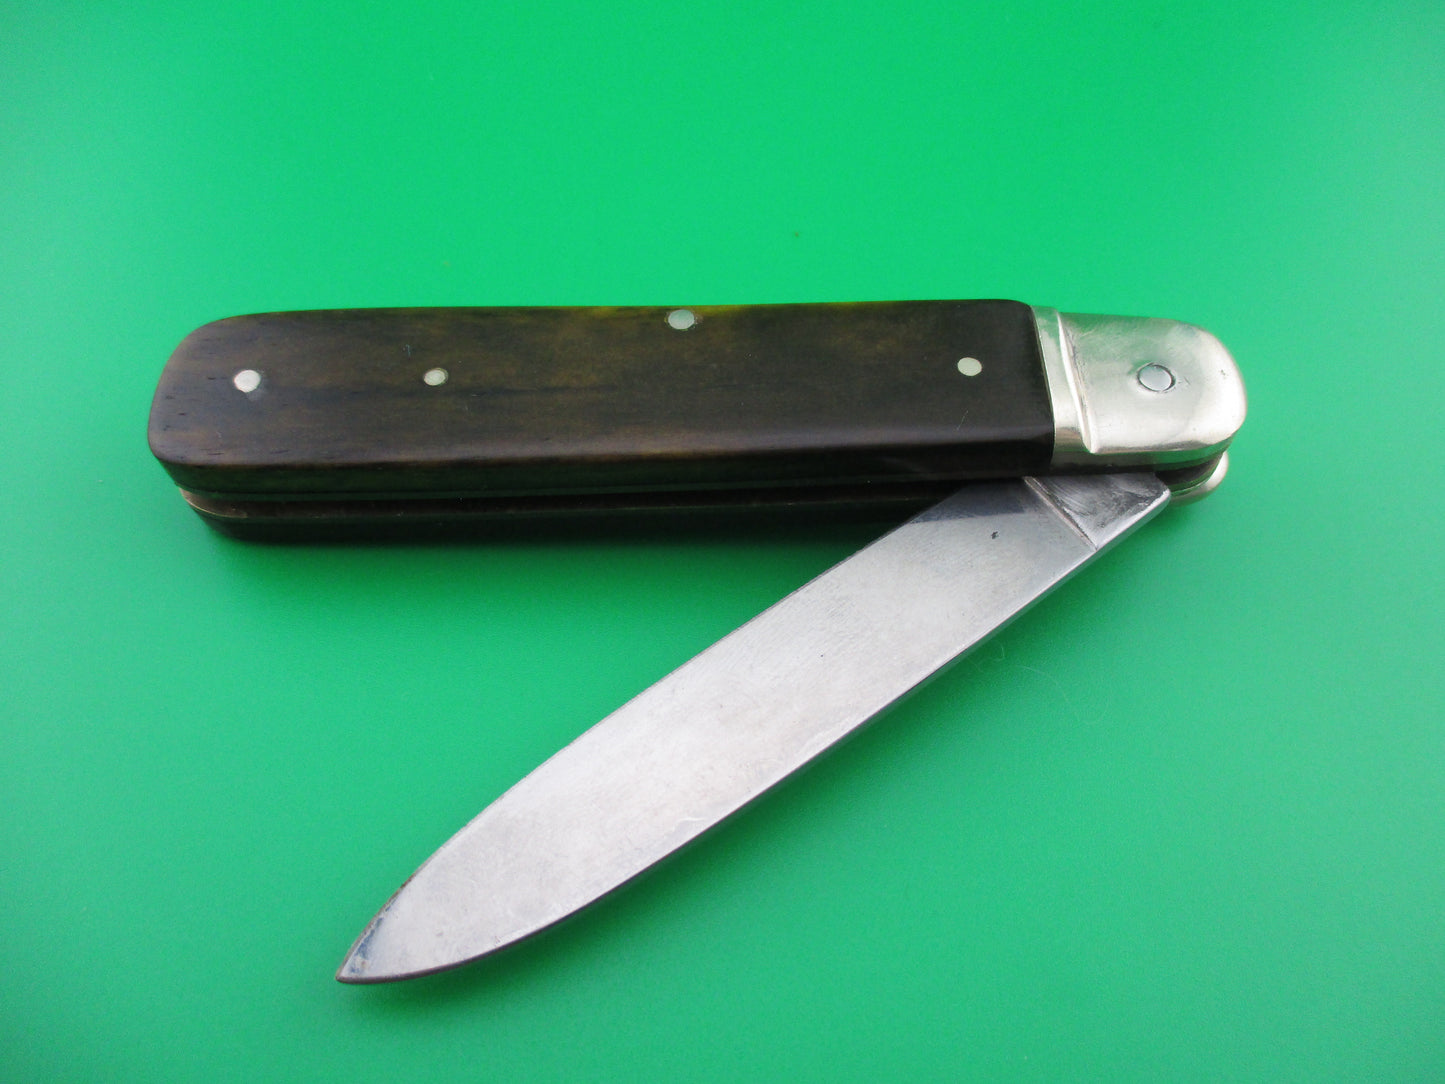 BOKER 11cm Tree Brand Classic 712 German Lever automatic knife